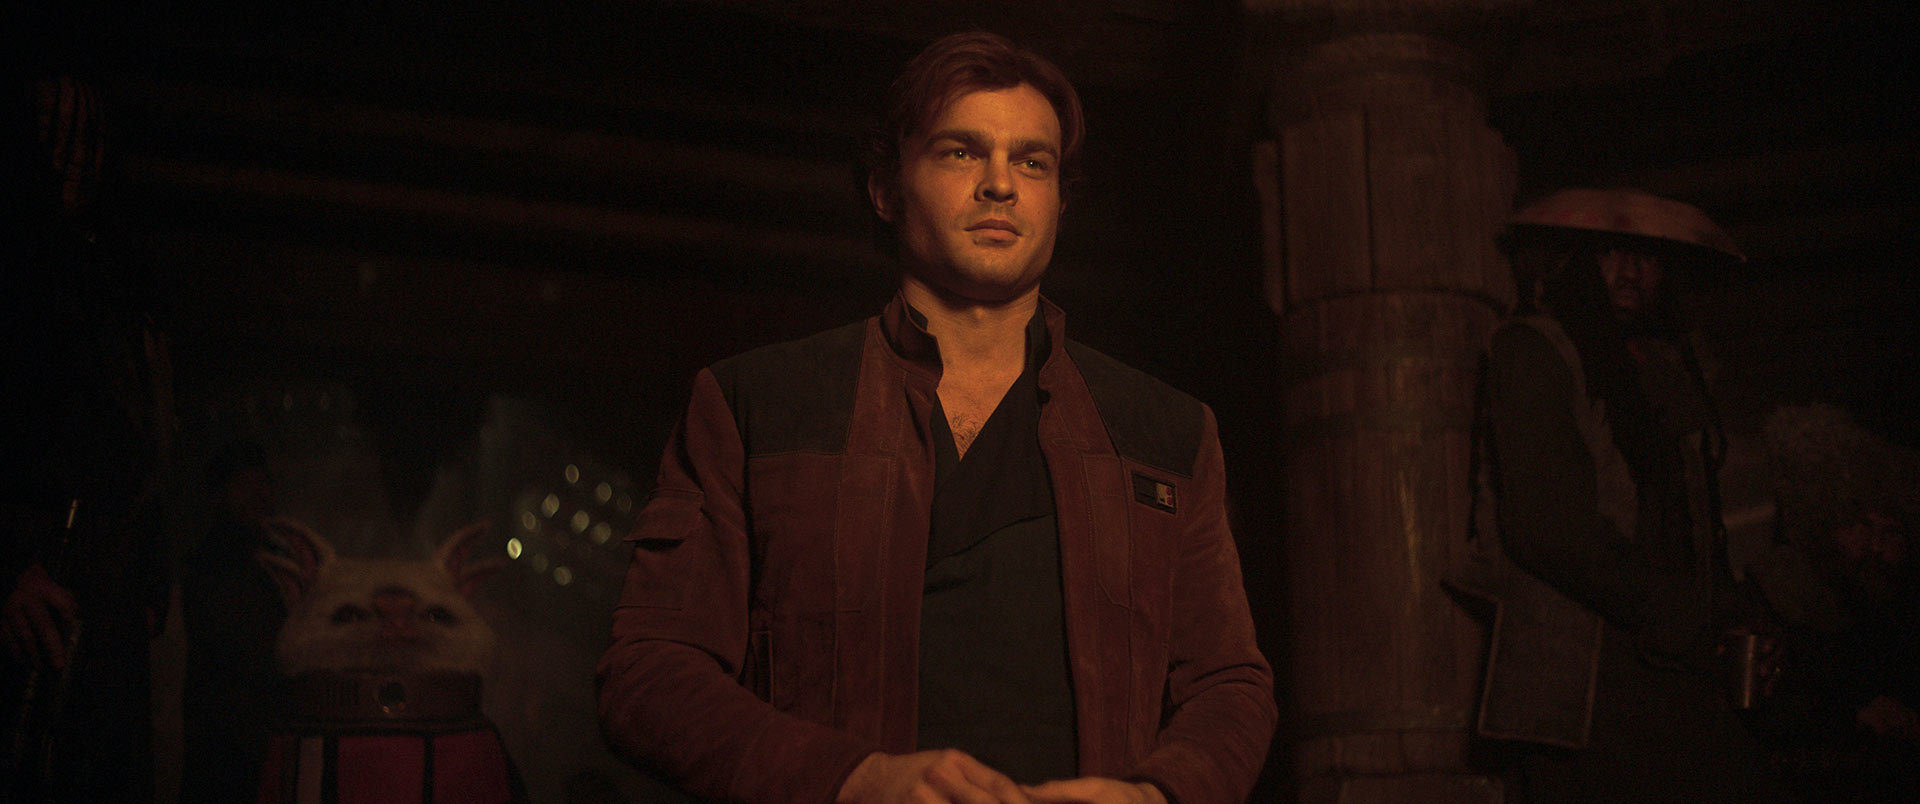 Two New Clips Released for Solo: A Star Wars Story